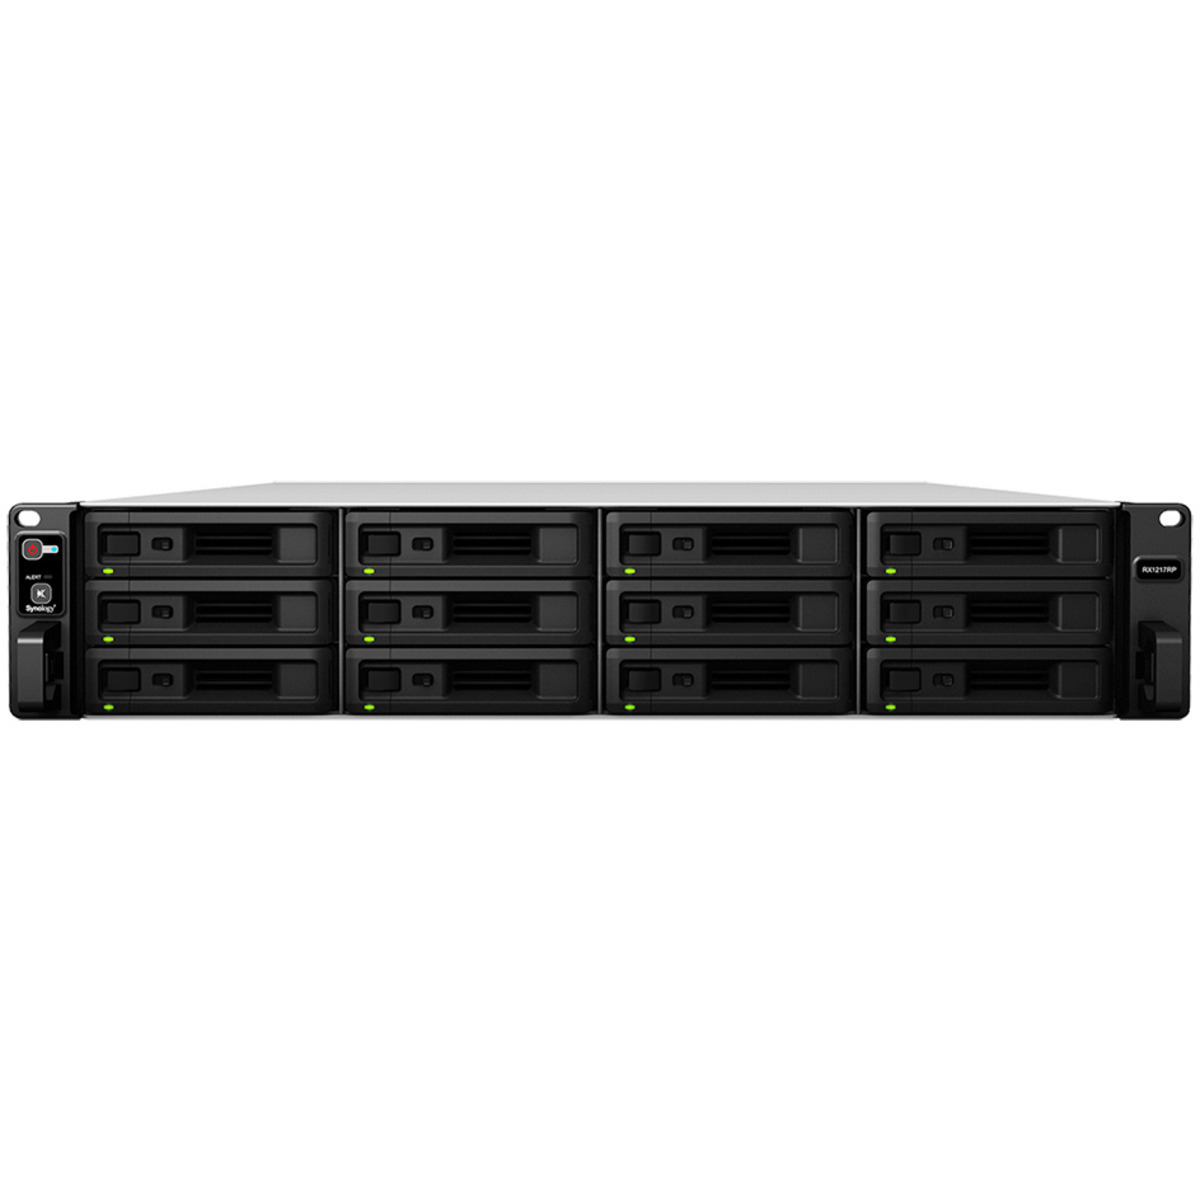 buy $3134 Synology RX1217RP 24tb RackMount Expansion Enclosure 12x2000gb Seagate BarraCuda ST2000DM008 3.5 7200rpm SATA 6Gb/s HDD CONSUMER Class Drives Installed - Burn-In Tested - ON SALE - nas headquarters buy network attached storage server device das new raid-5 free shipping usa christmas new year holiday sale RX1217RP